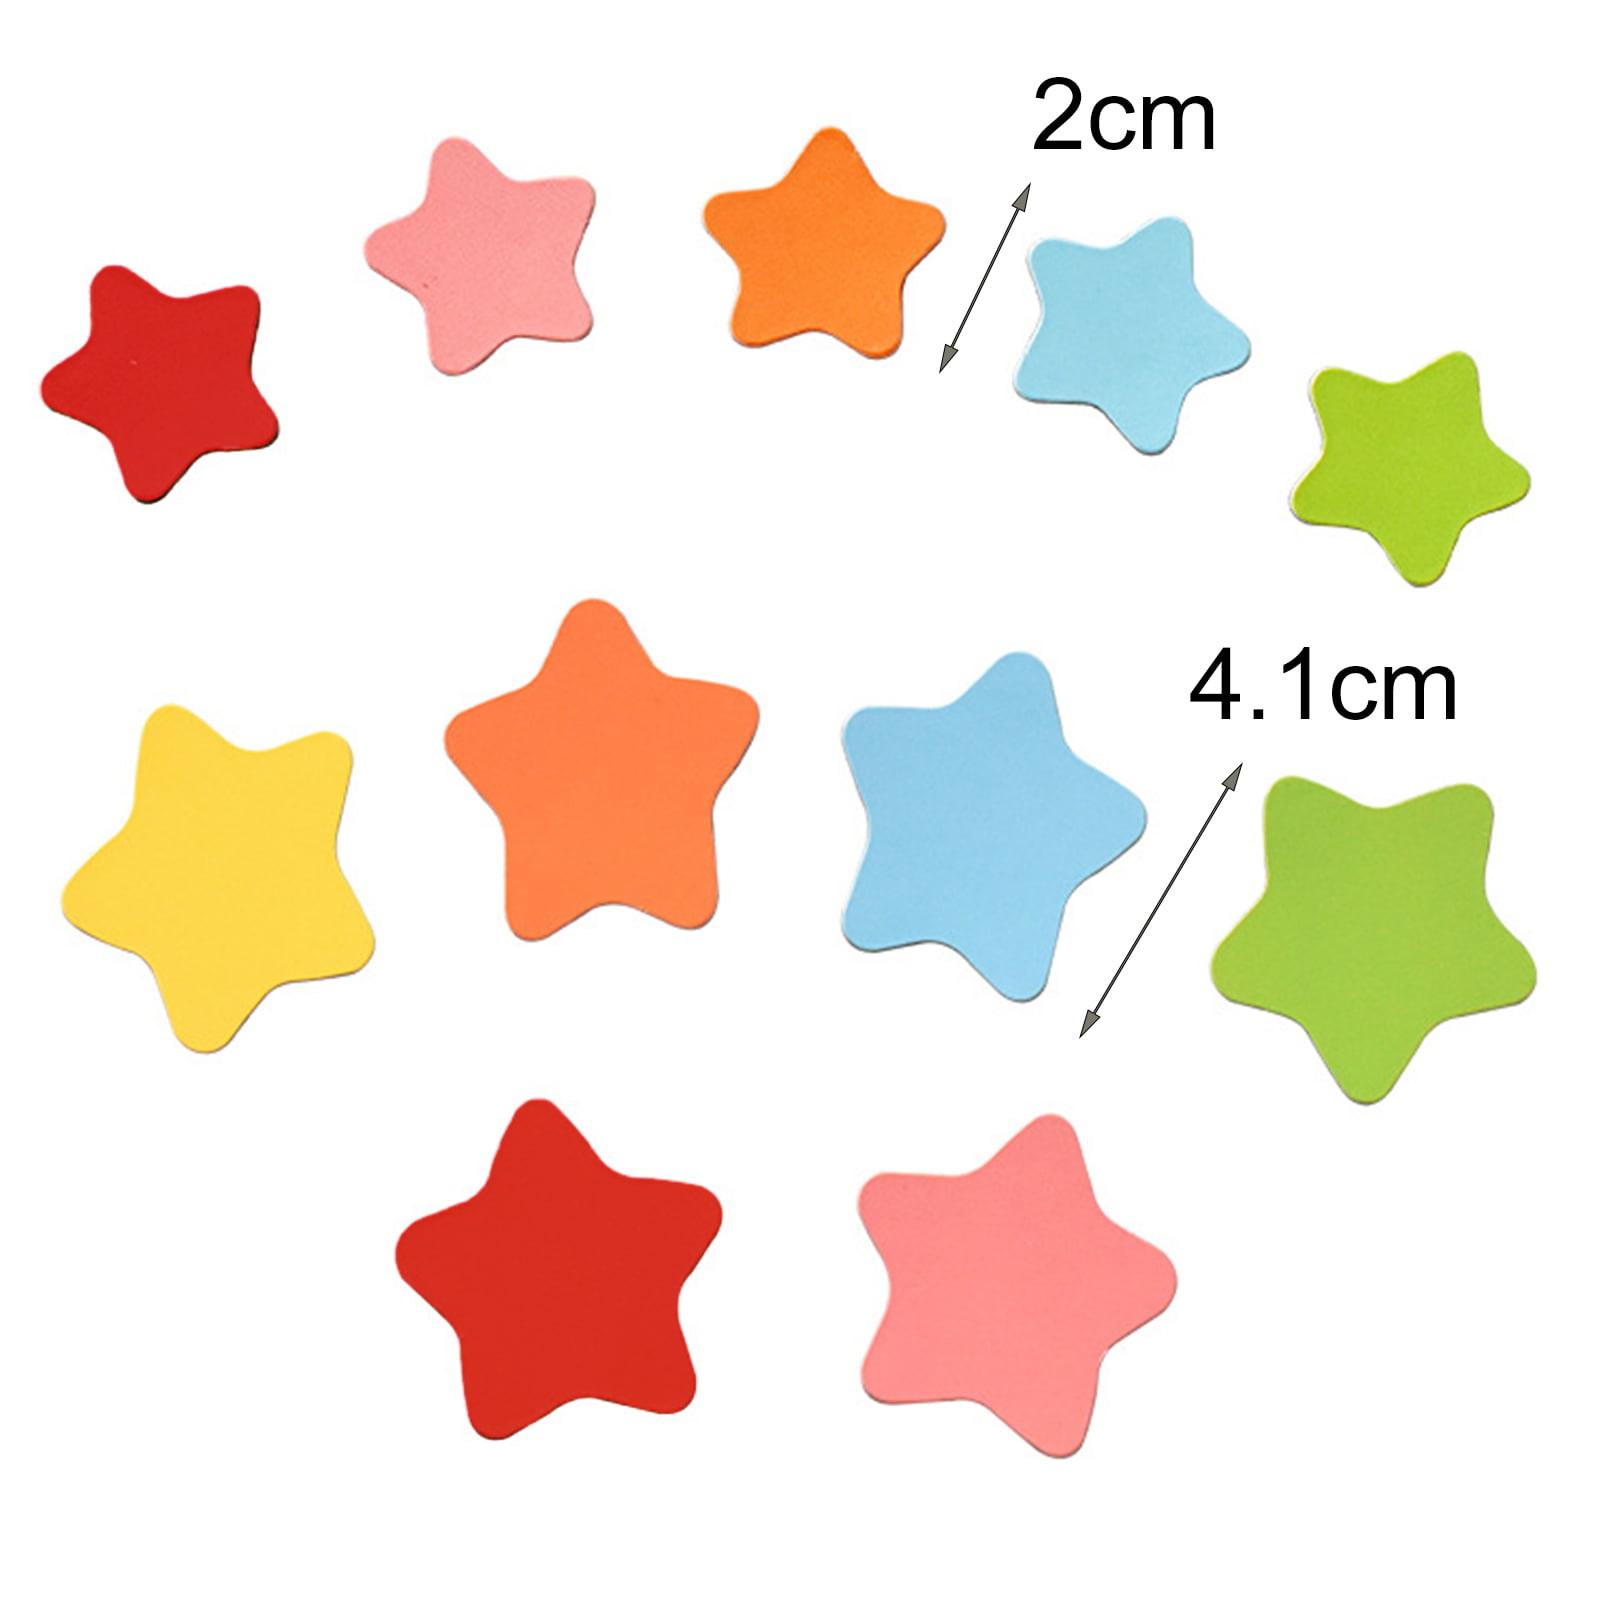 Dream Lifestyle Adhesive Magnets Dot, Strip Shape Magnetic Sheet